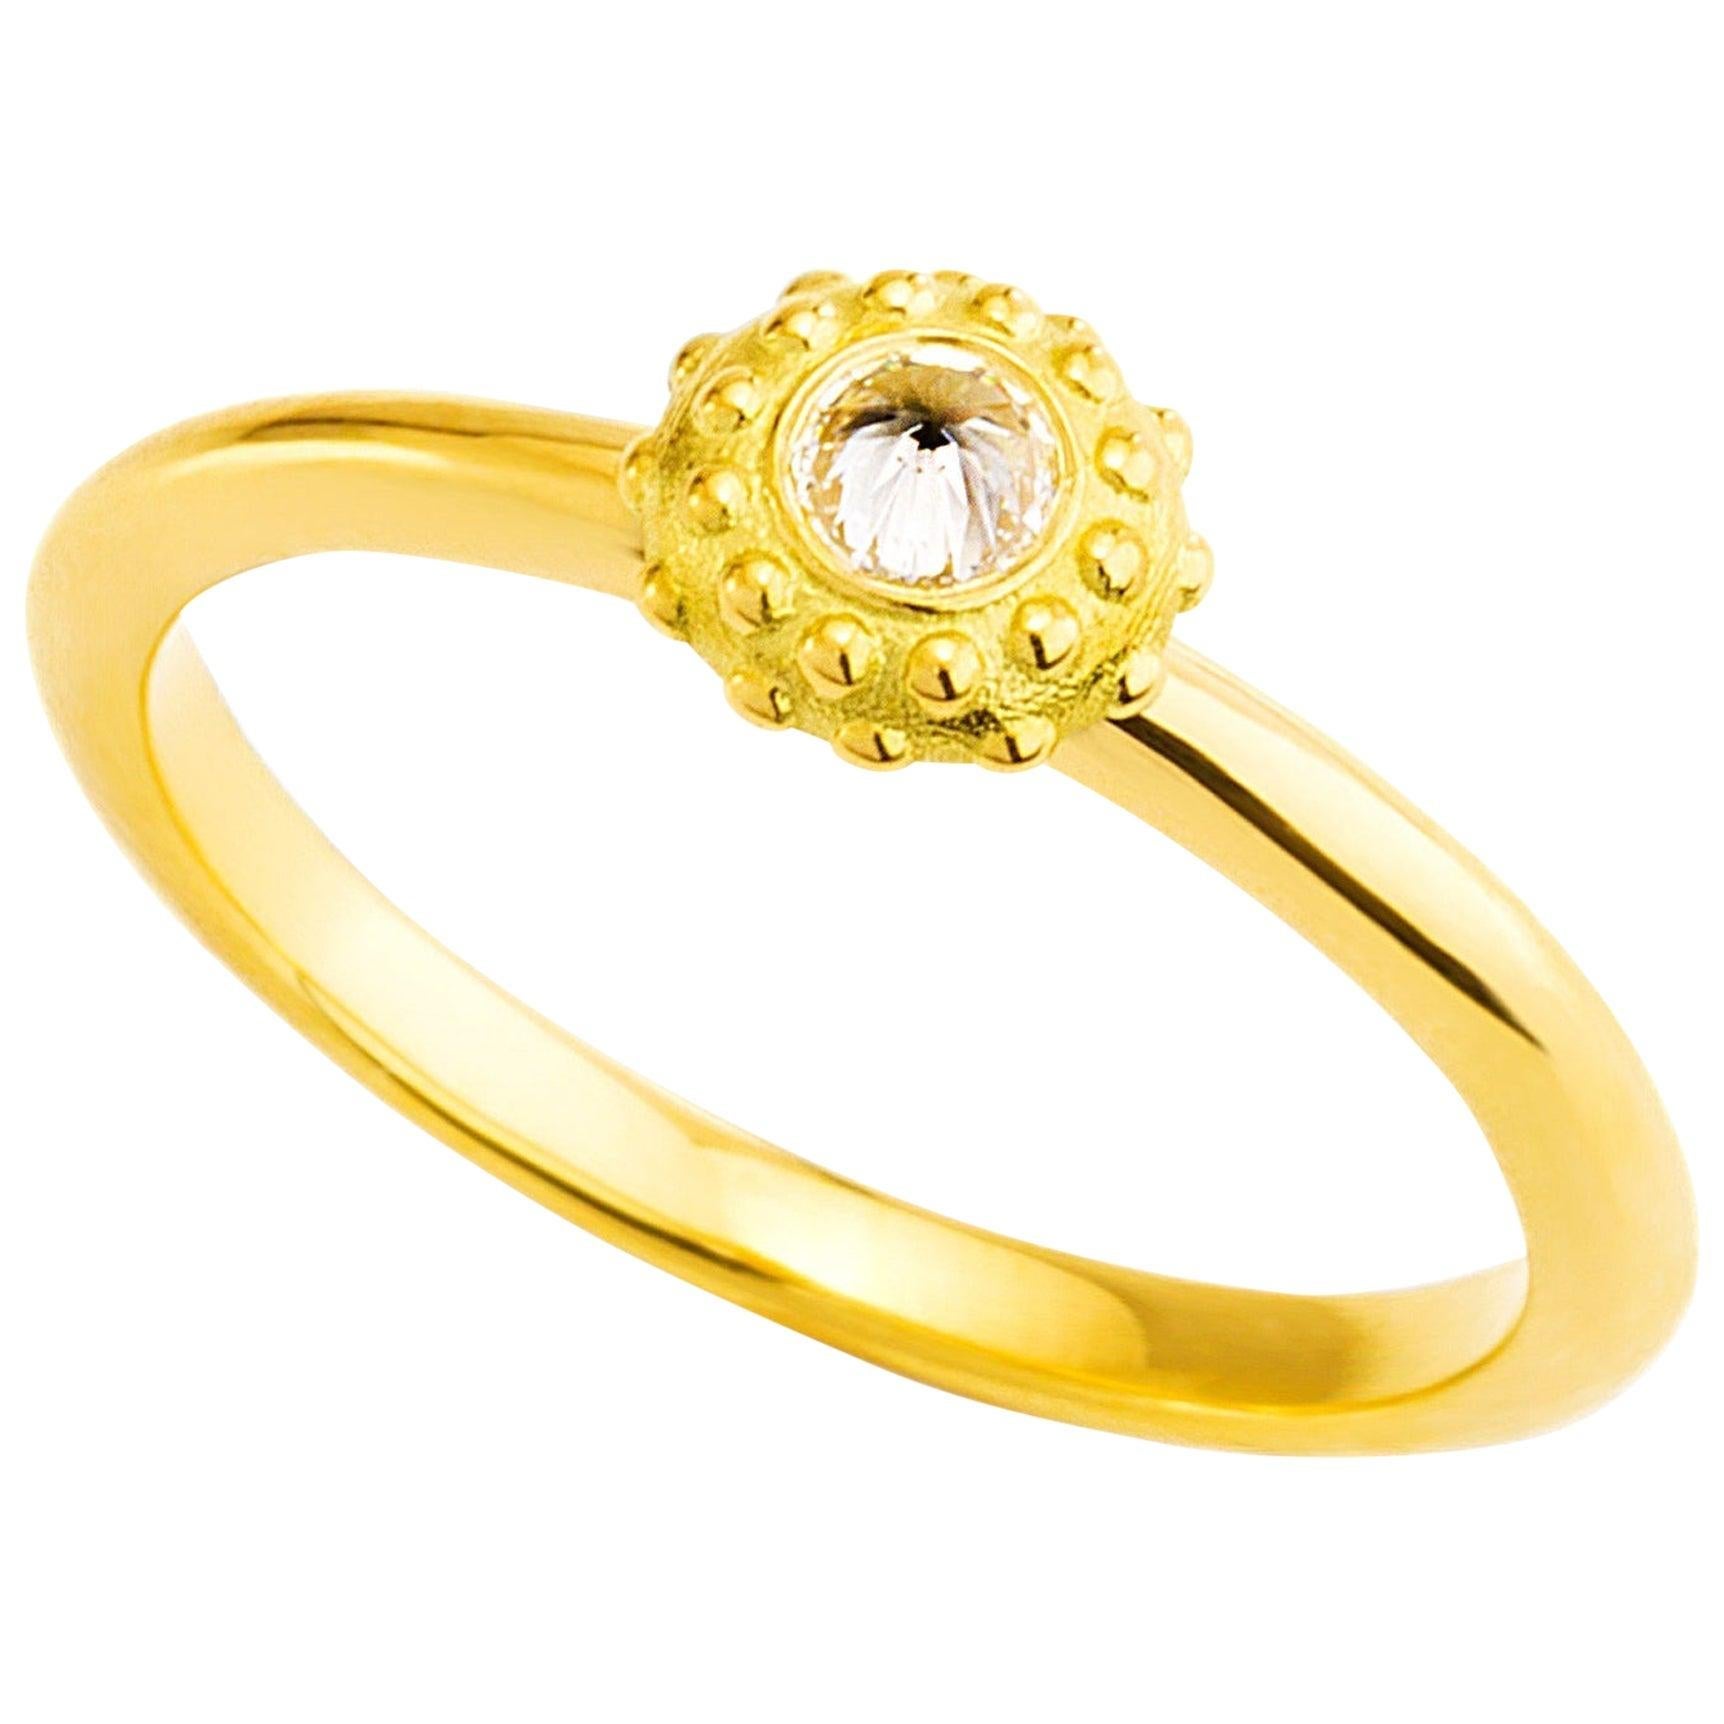 For Sale:  AnaKatarina Yellow Gold and Diamond 'Evolution' Stacking Ring